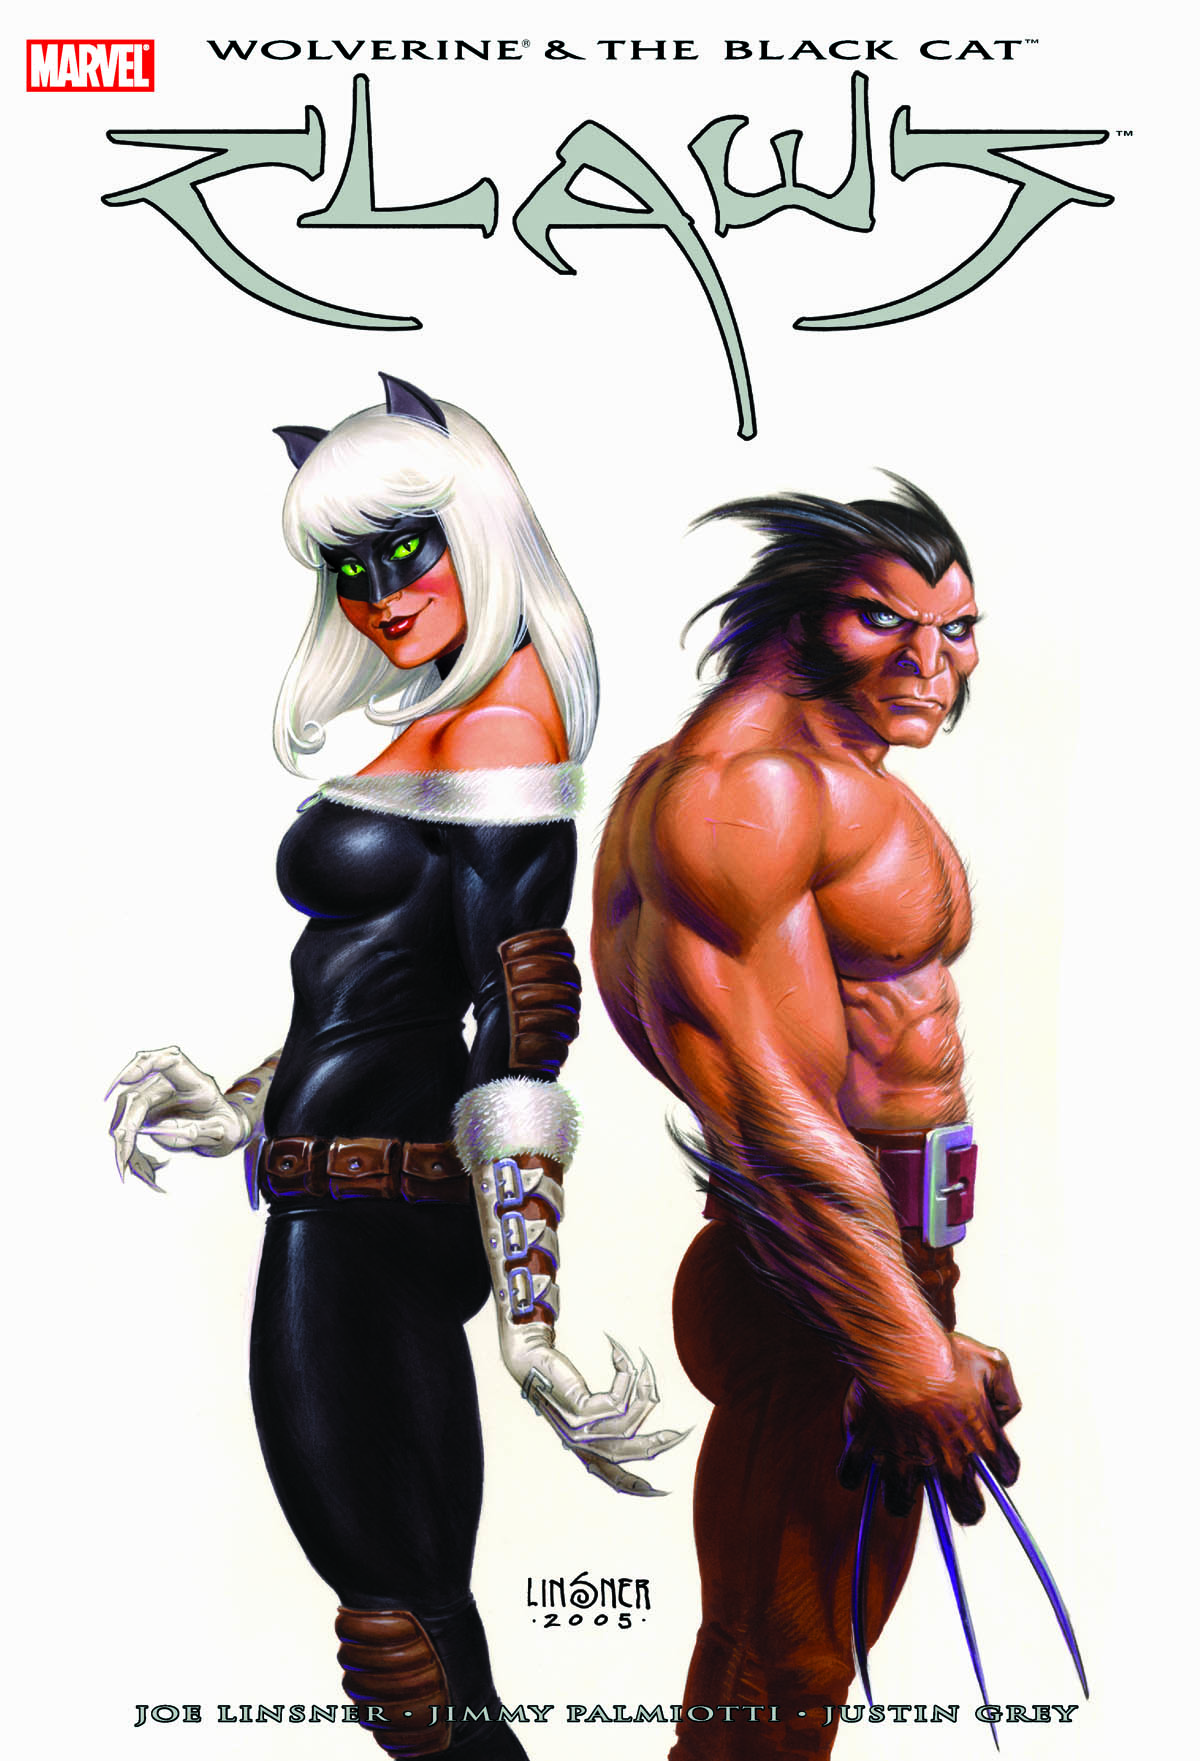 WOLVERINE & BLACK CAT: CLAWS HC (Trade Paperback)